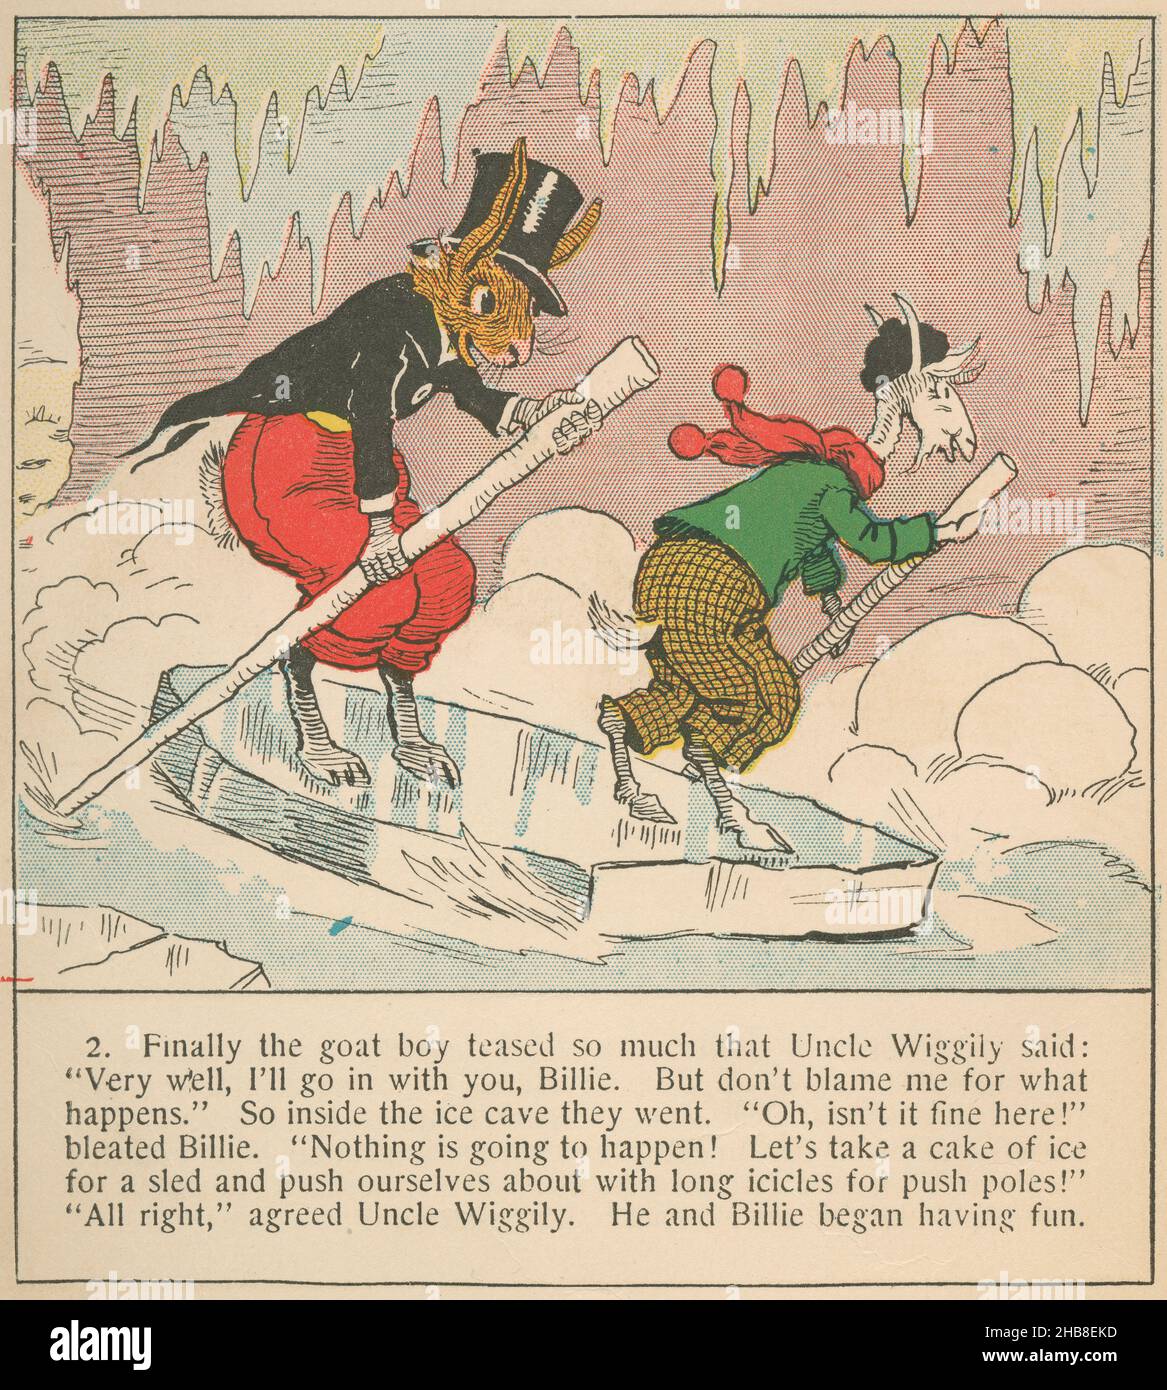 Uncle Wiggily and Billie goat on an ice raft in an ice cave, from a 1920 book by Howard R. Garis. Stock Photo